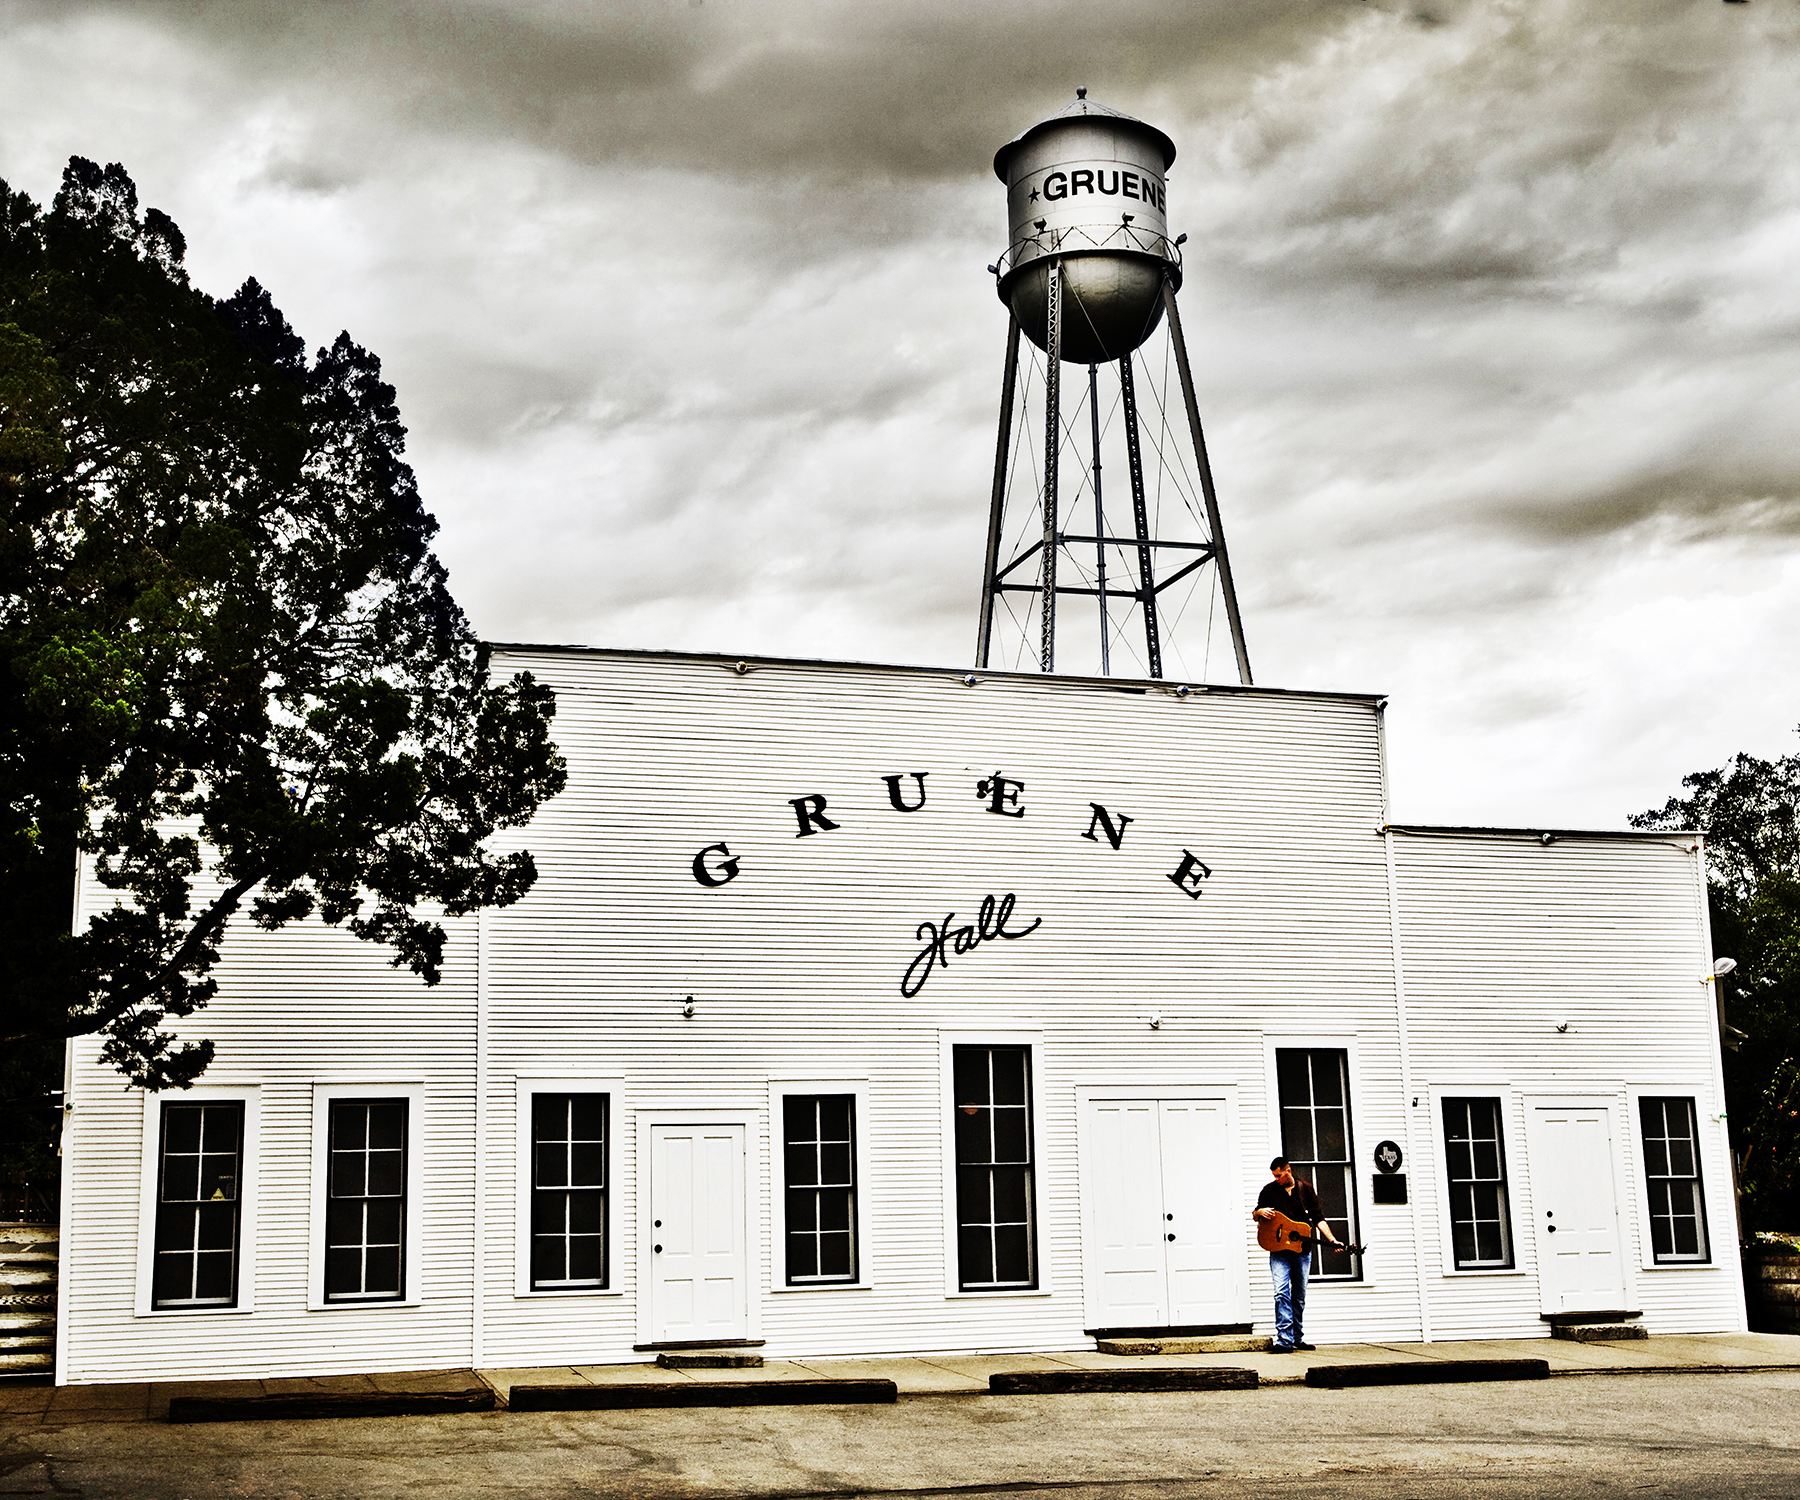 The oldest dance hall in Texas, Gruene Hall has been a gathering place to relax, dance, and connect since 1878.